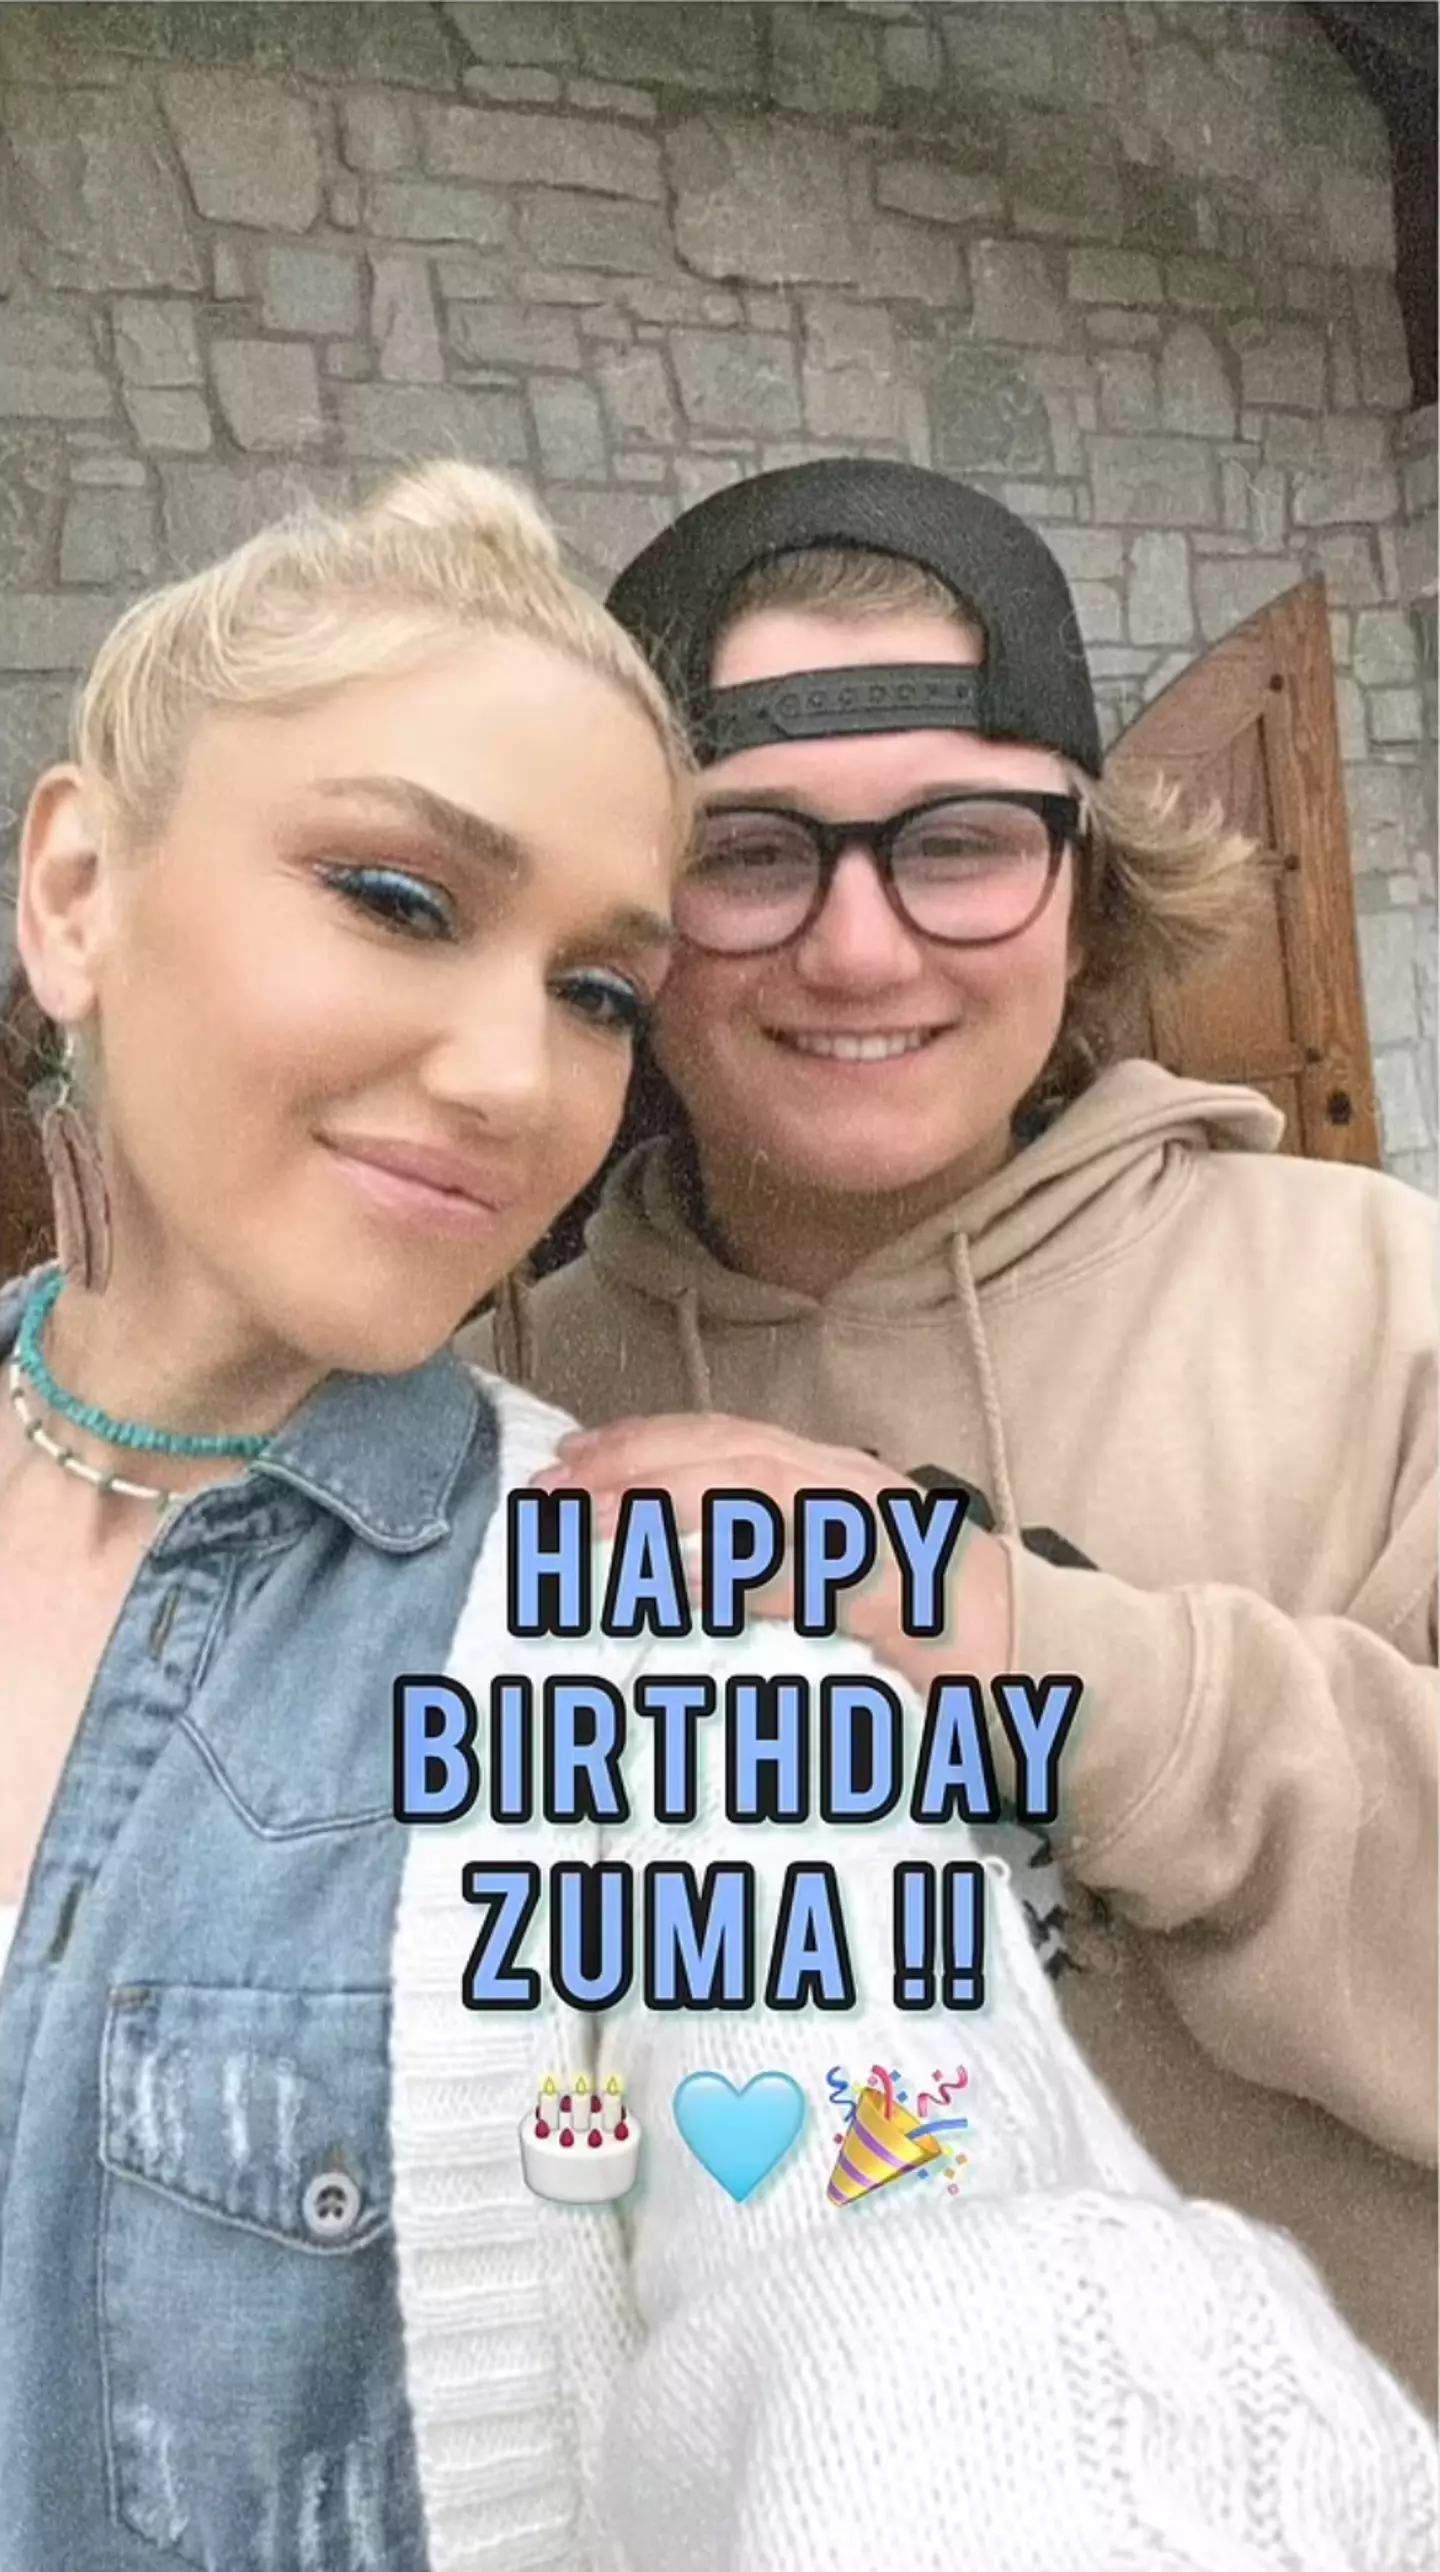 One of the several cute snaps Gwen Stefani shared of Zuma.